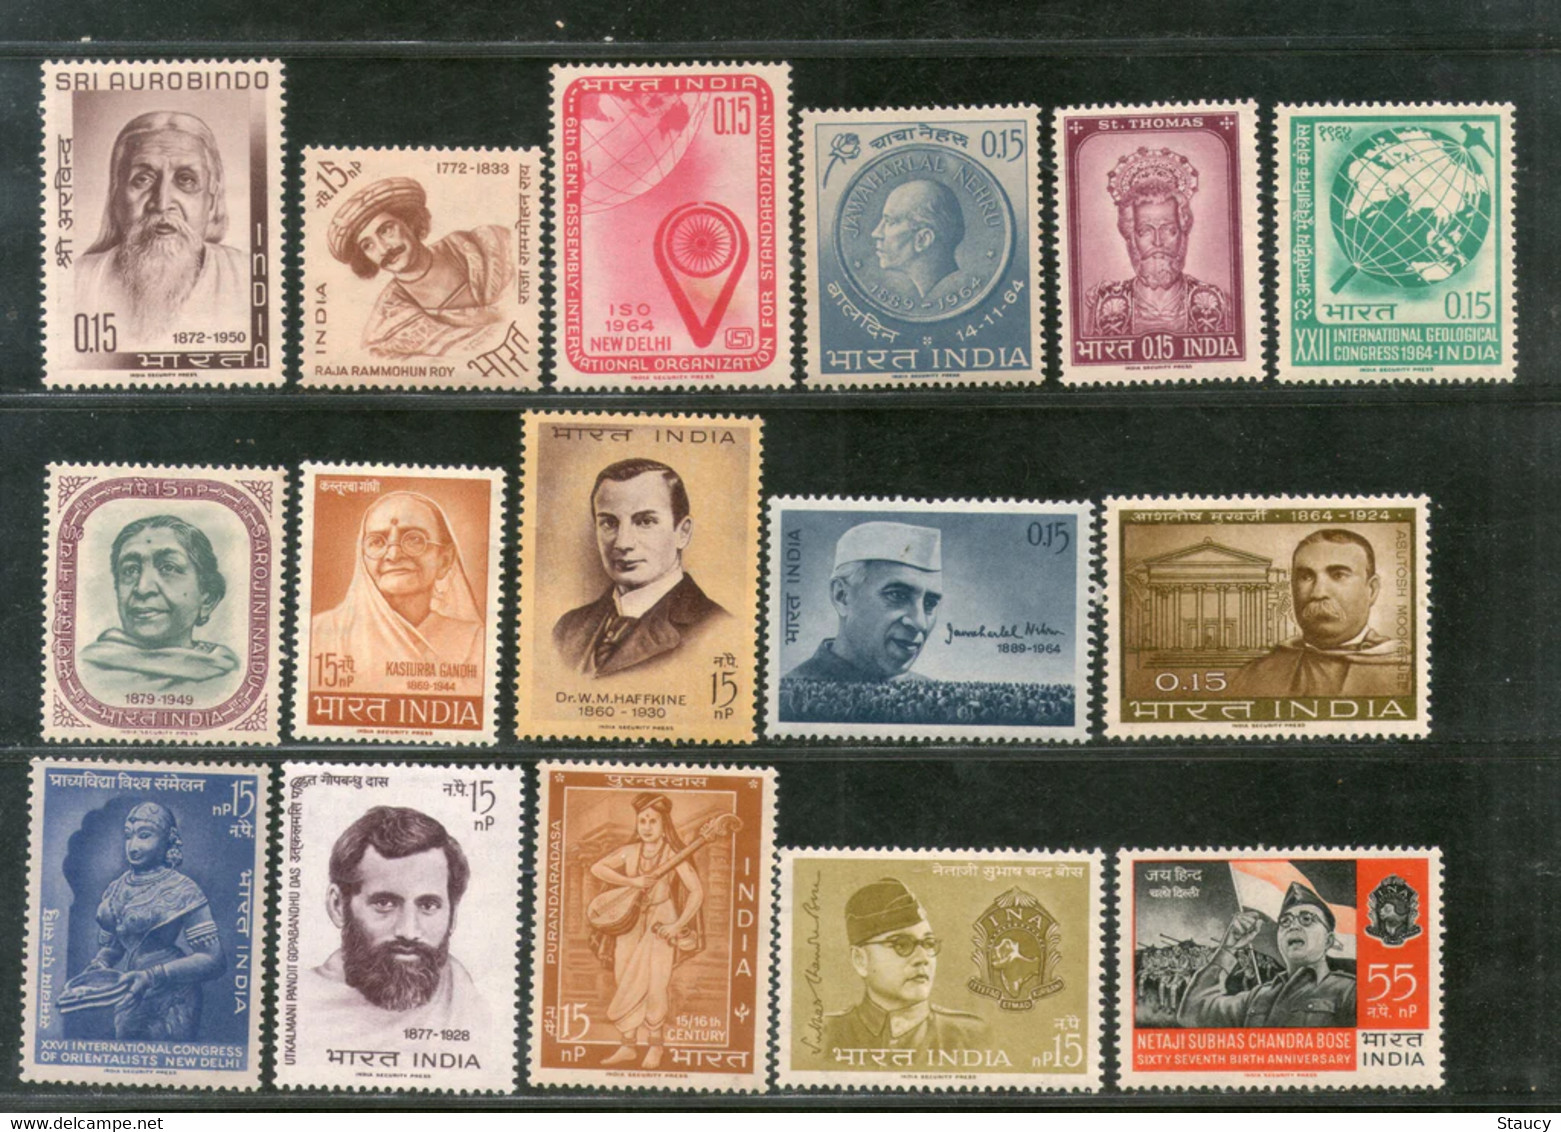 India 1964 Complete Year Pack / Set / Collection Total 16 Stamps (No Missing) MNH As Per Scan - Volledig Jaar